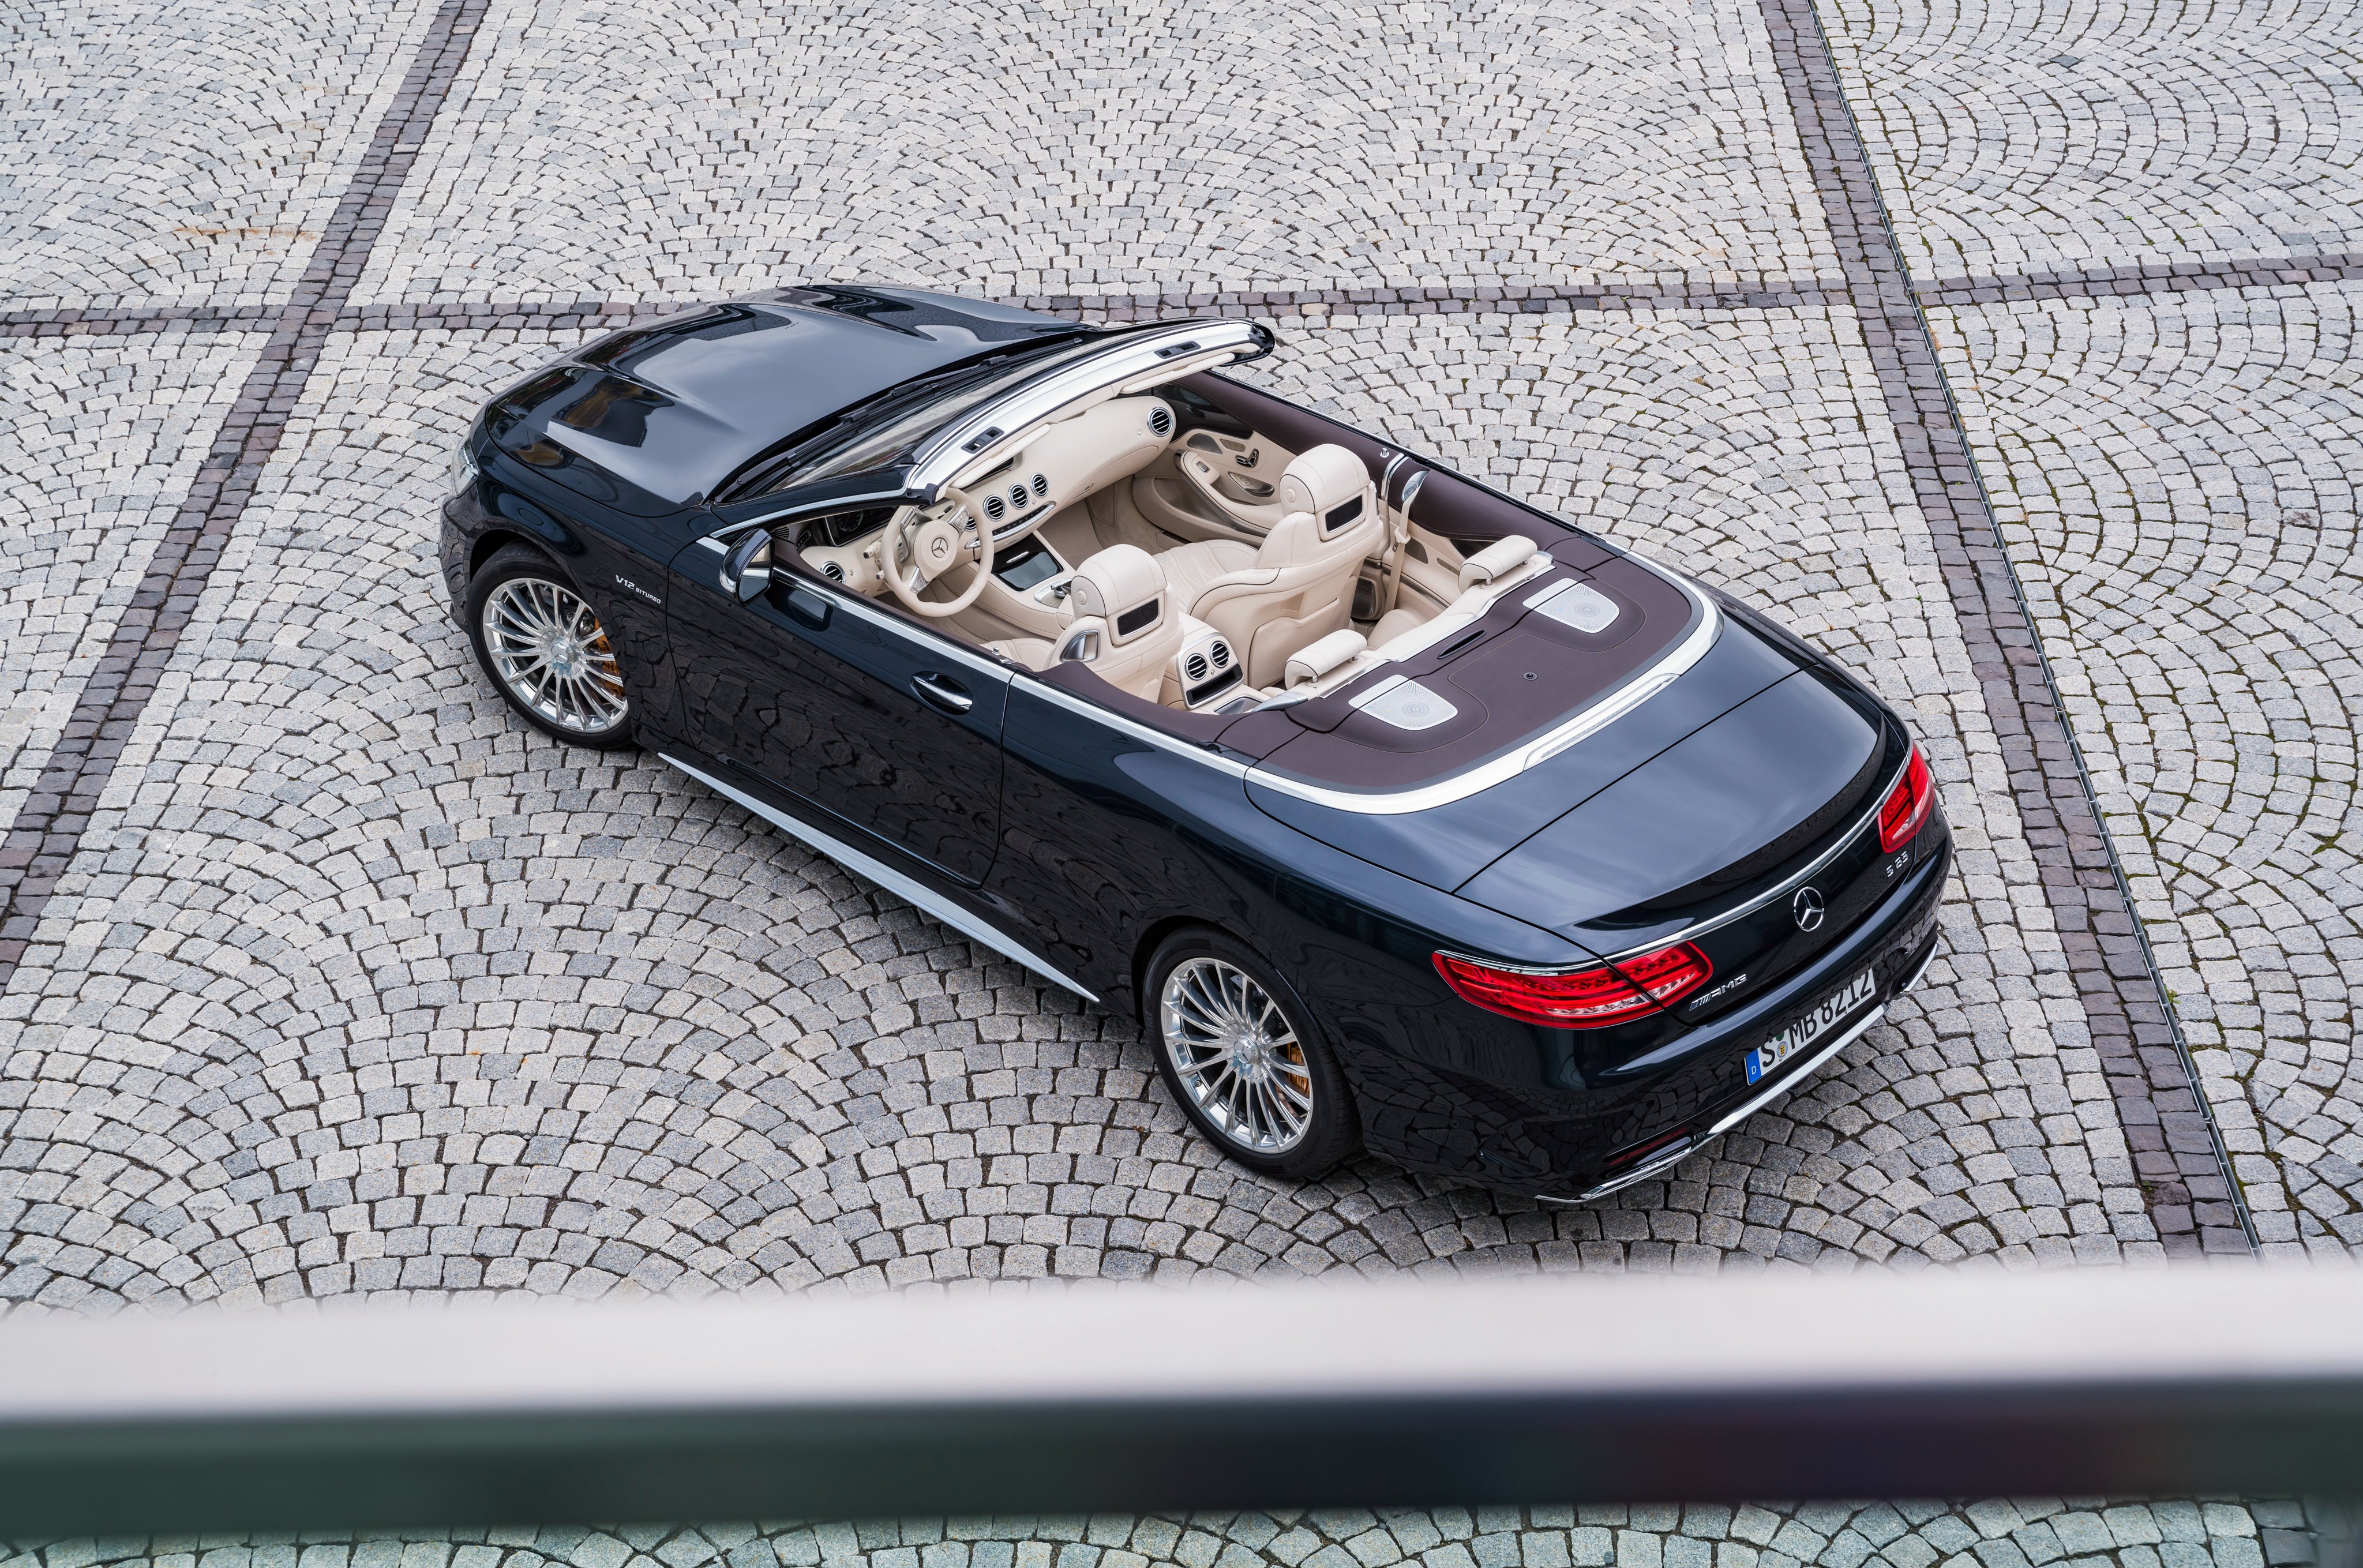 2016, Mercedes, Benz, Amg, S65, Cabriolet, A217, Convertible, Luxury Wallpaper